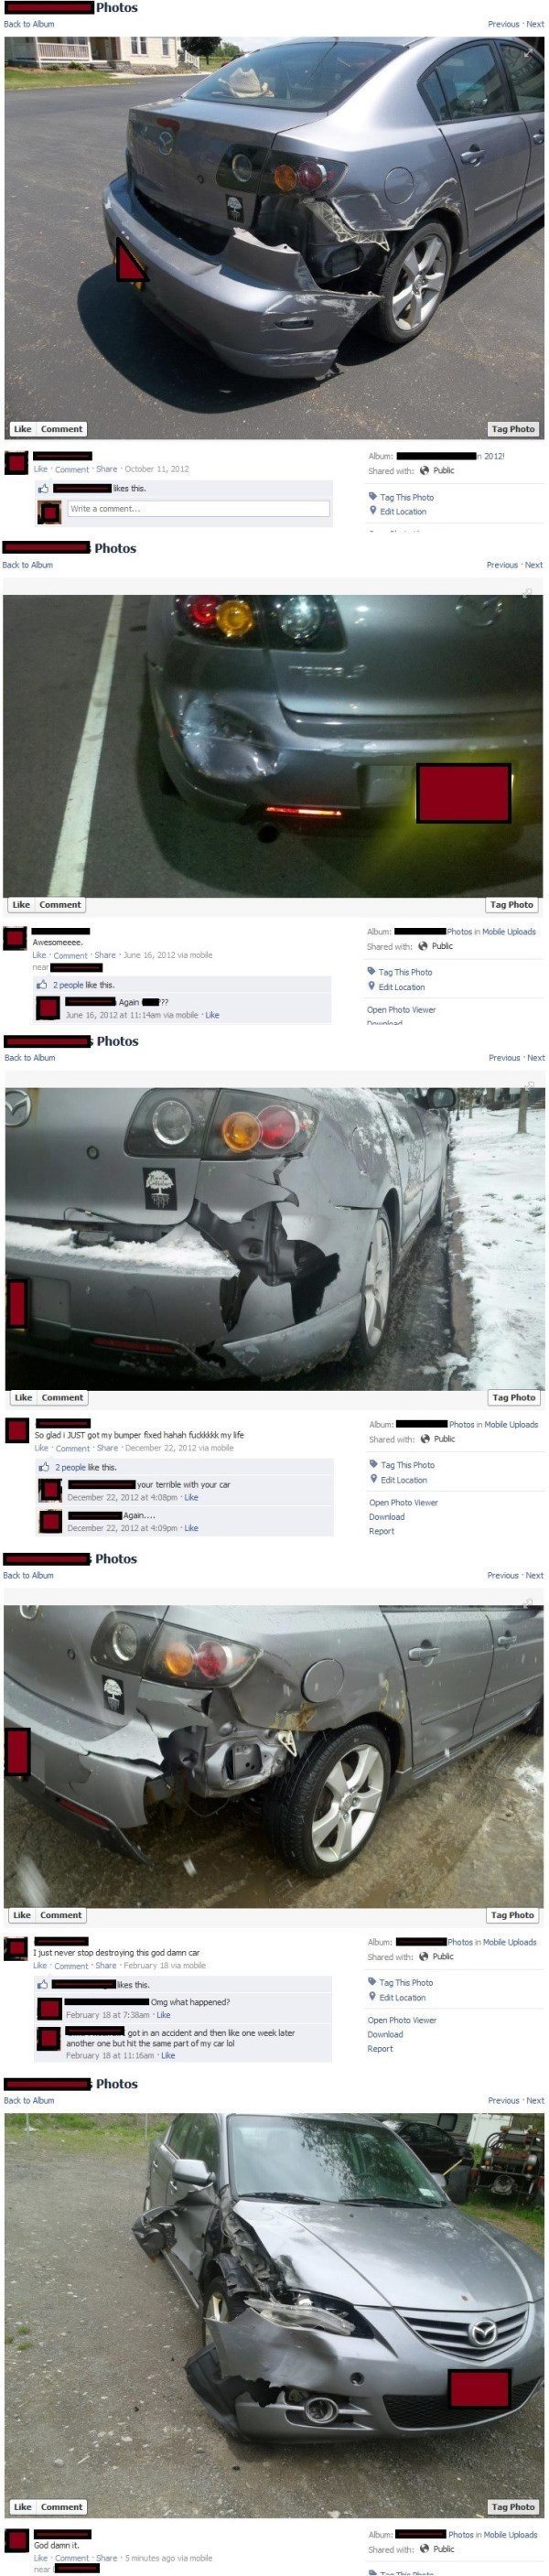 Facebook Pictures Bad Driver